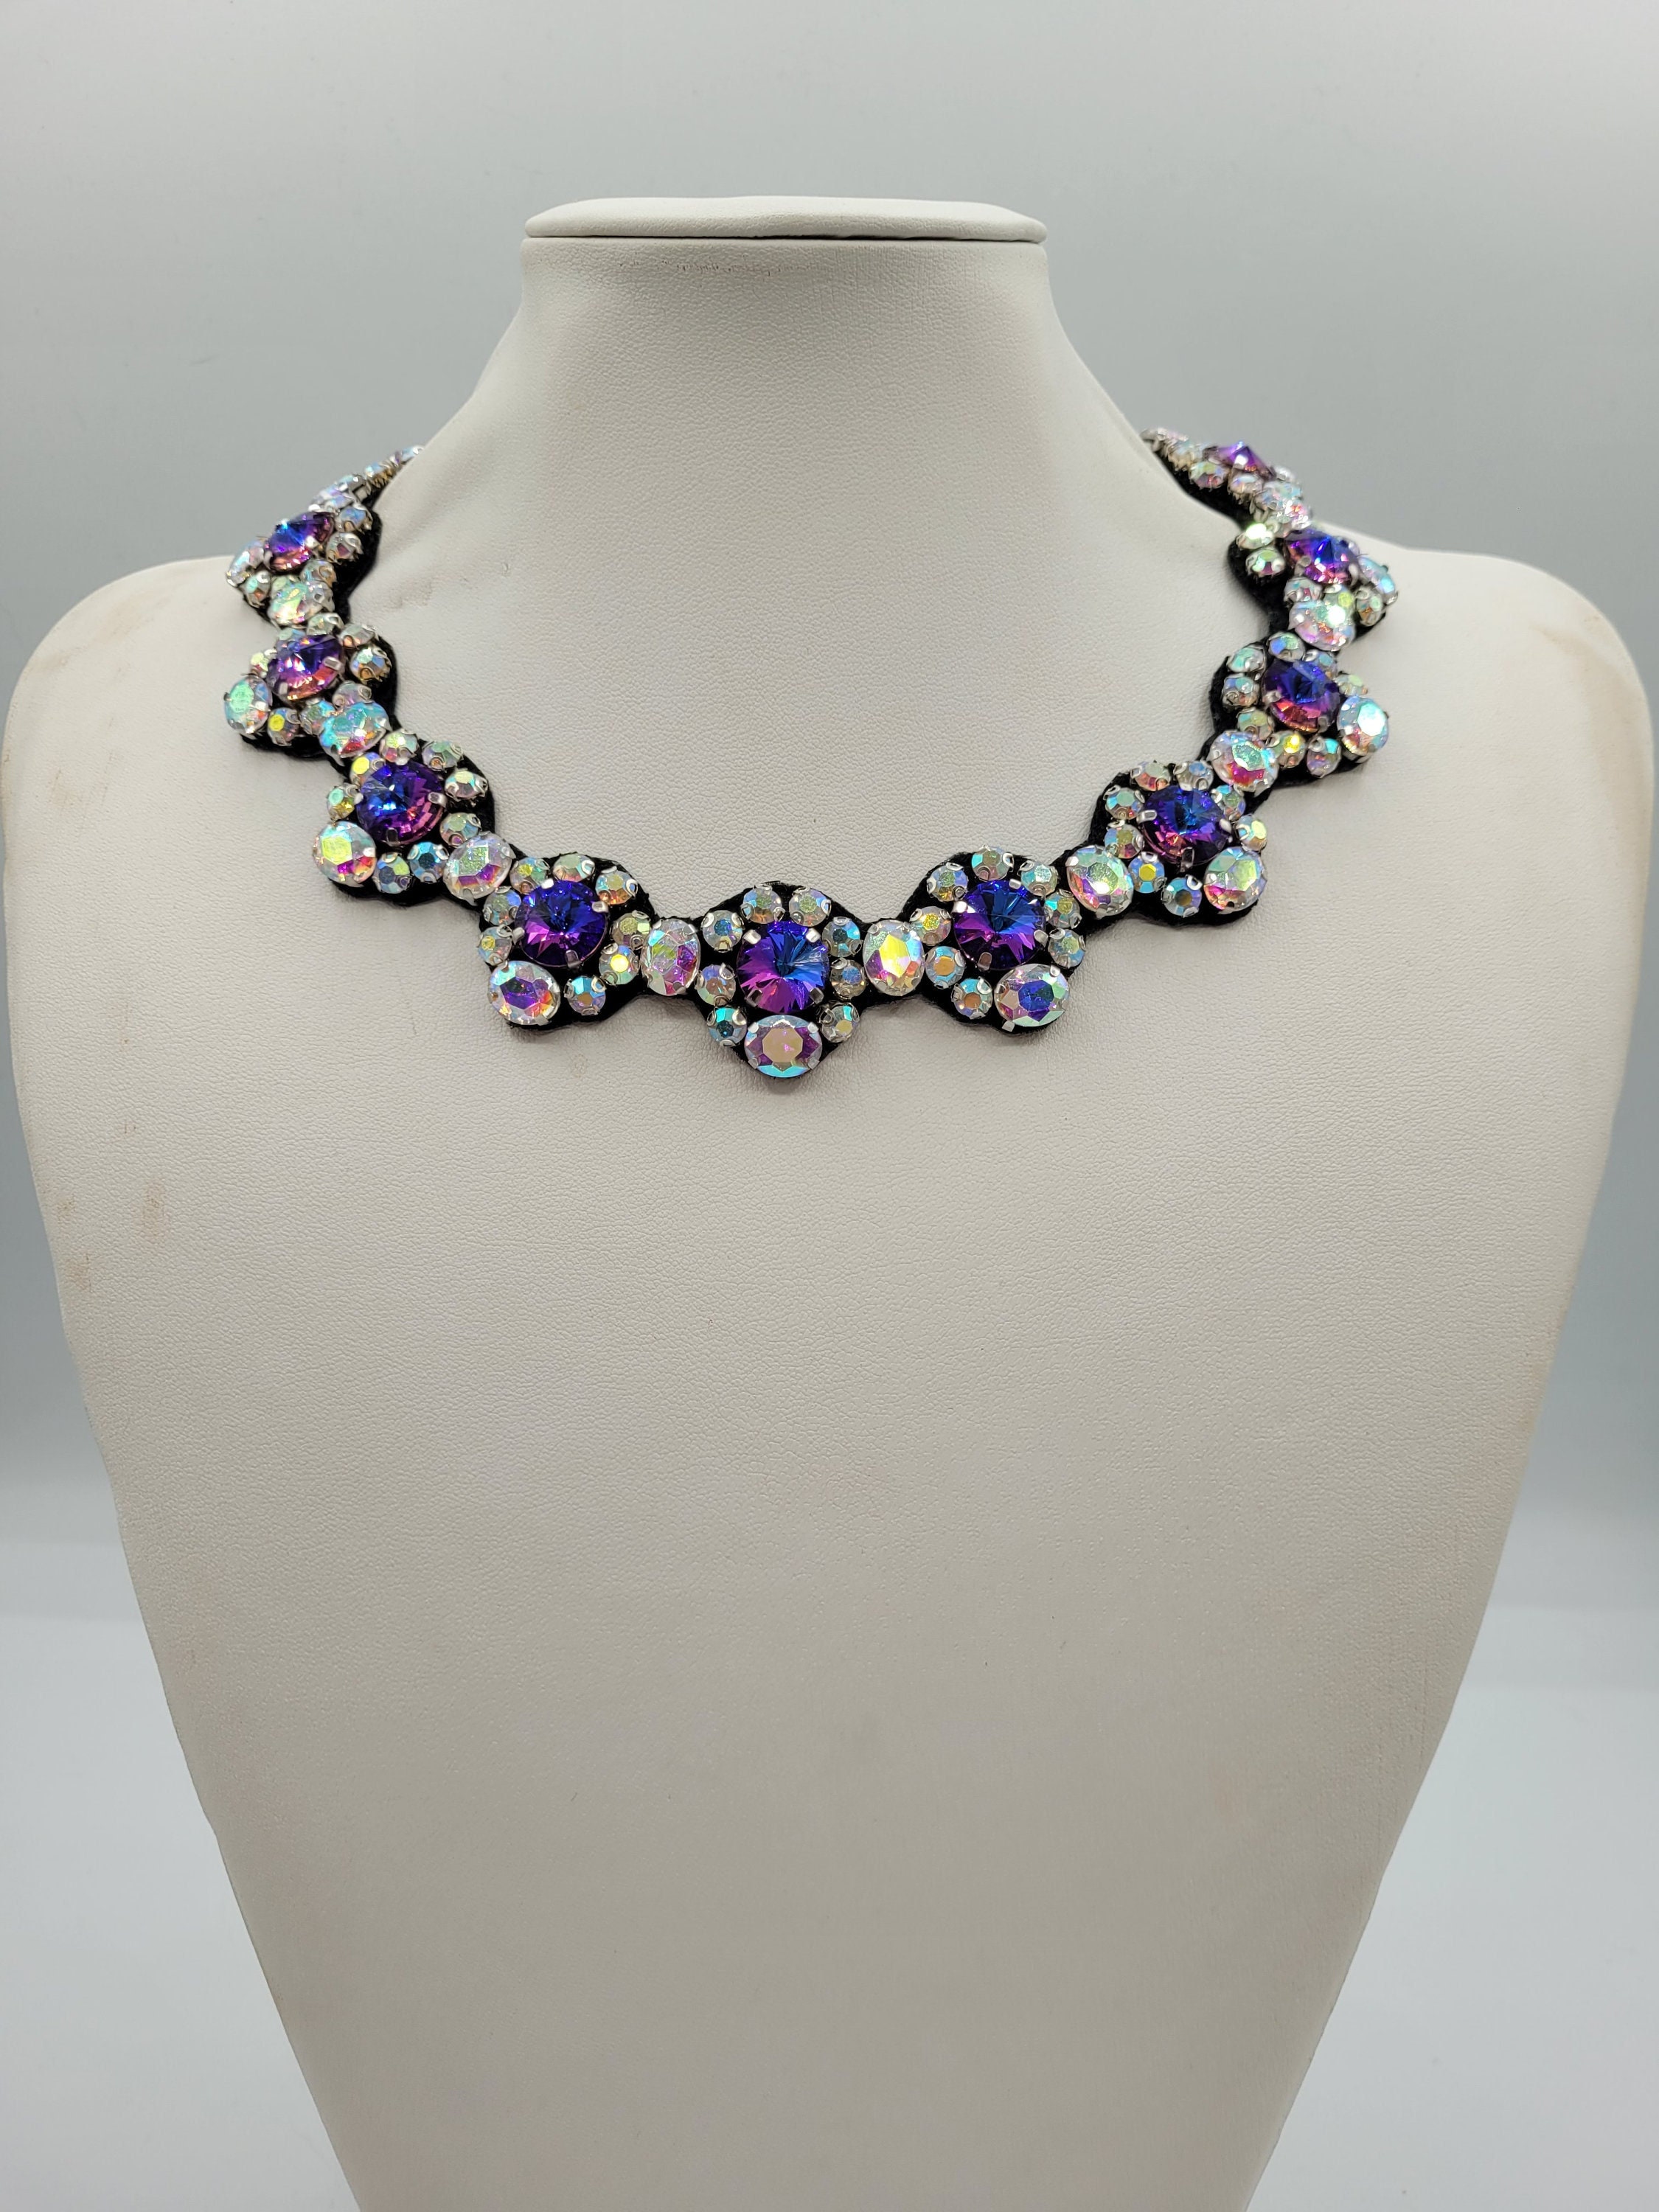 Statement Necklaces, Strass Necklaces, Esther Necklace, Diamond Necklaces, Statement, Broche Jewel, Jewel Necklace with Swarovski IV364